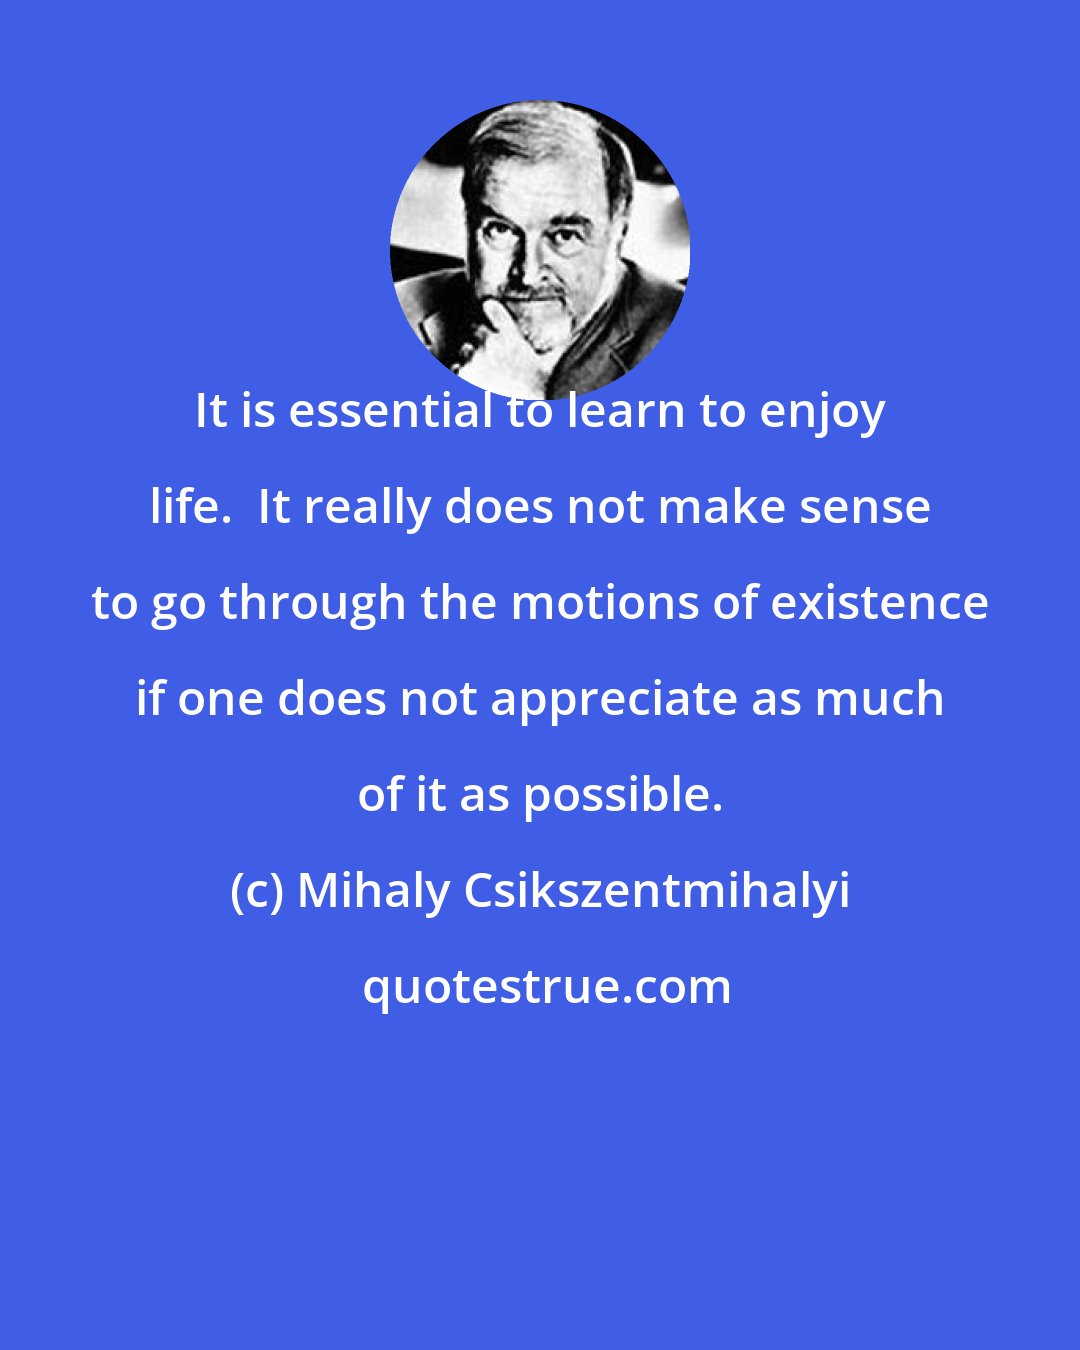 Mihaly Csikszentmihalyi: It is essential to learn to enjoy life.  It really does not make sense to go through the motions of existence if one does not appreciate as much of it as possible.